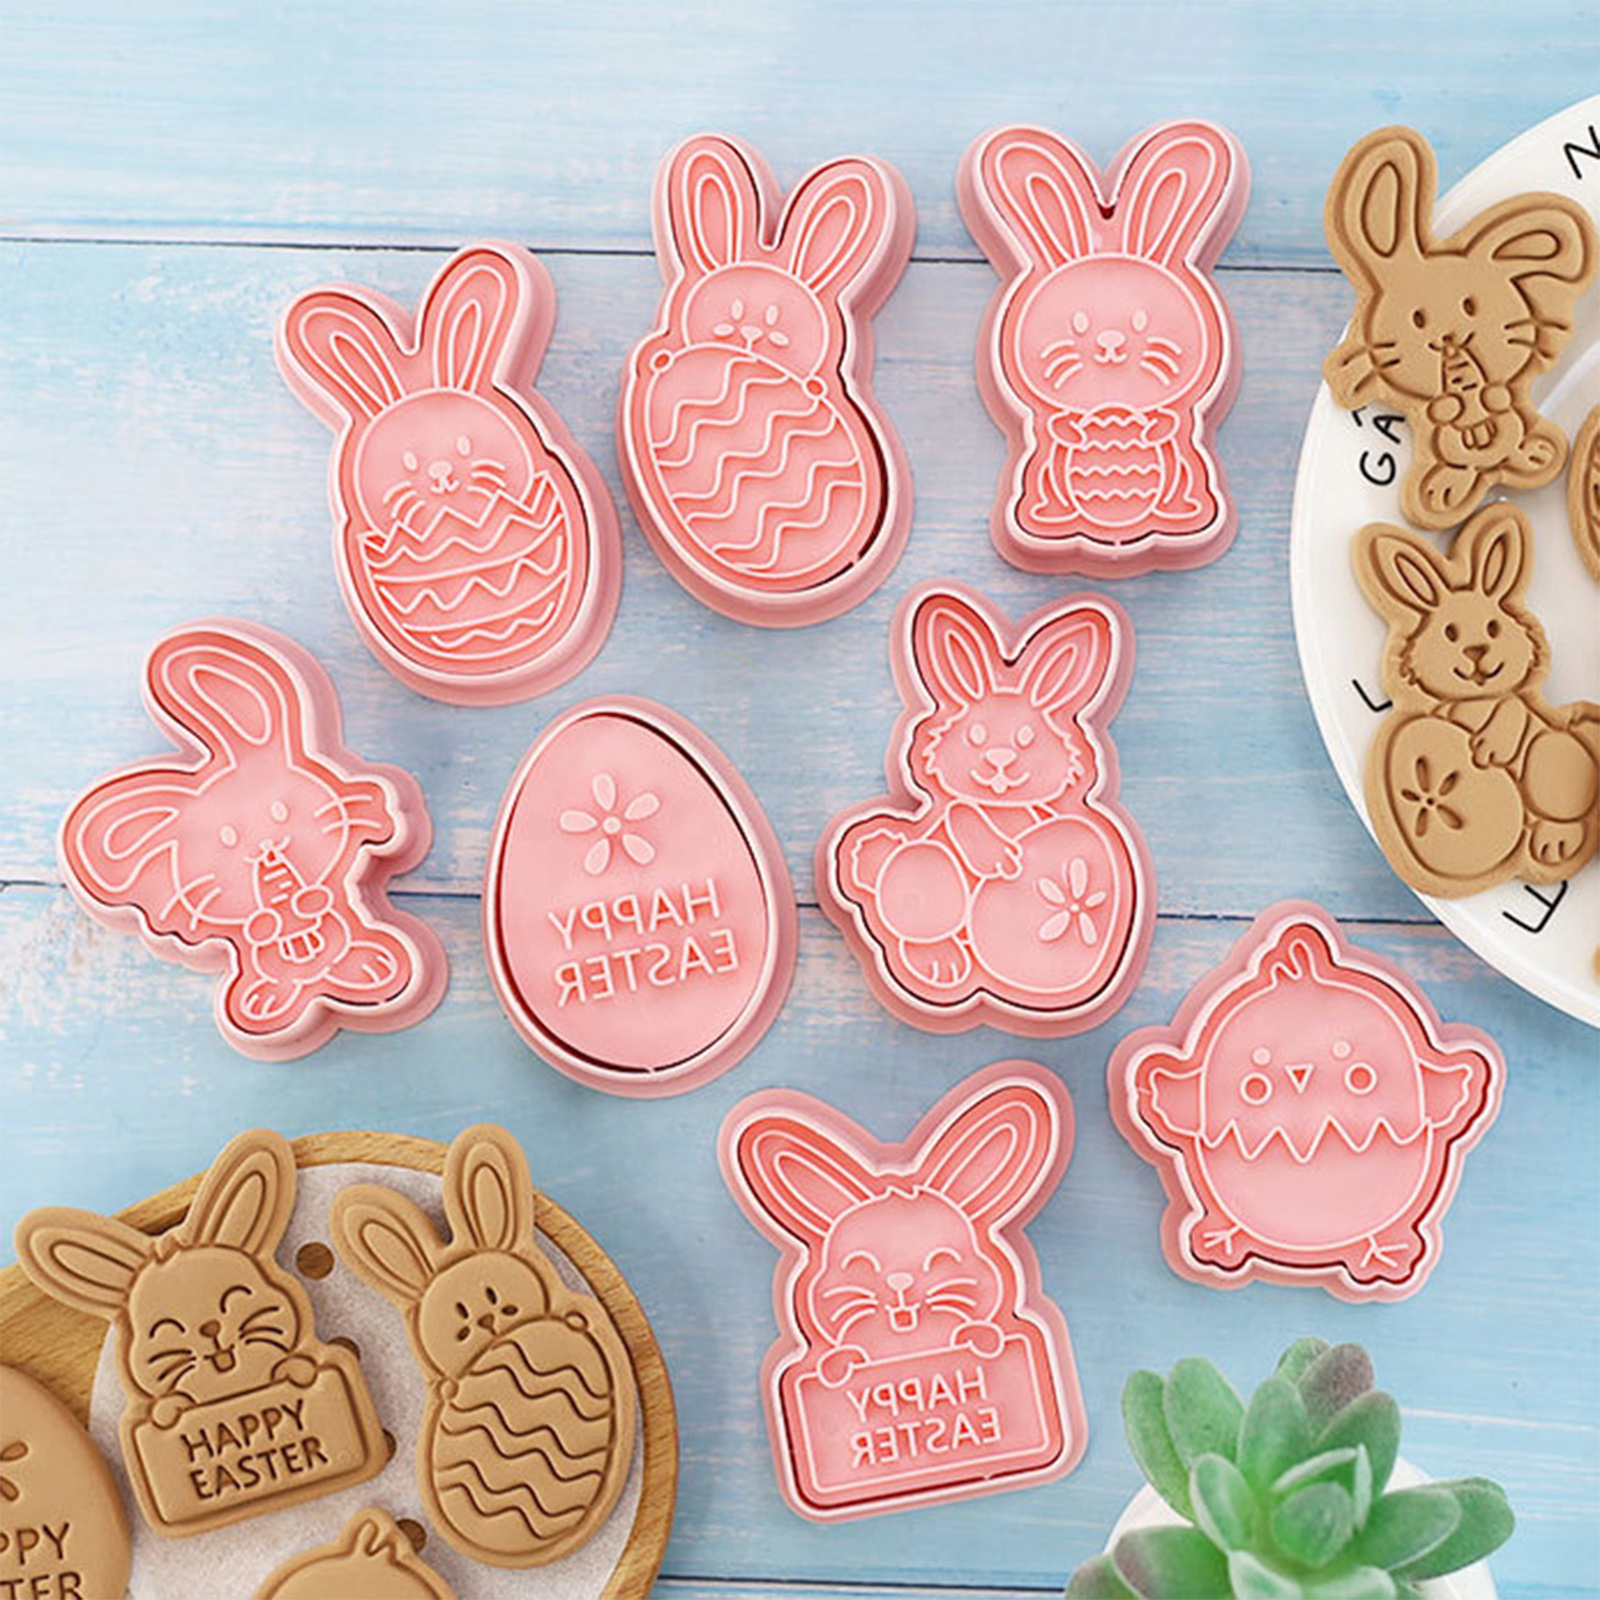 Mildsown Easter Cookie Cutters Set Egg Bunny Biscuit Press Molds Non-Stick Chocolate Cake Molds, Size: 8pcs, Pink